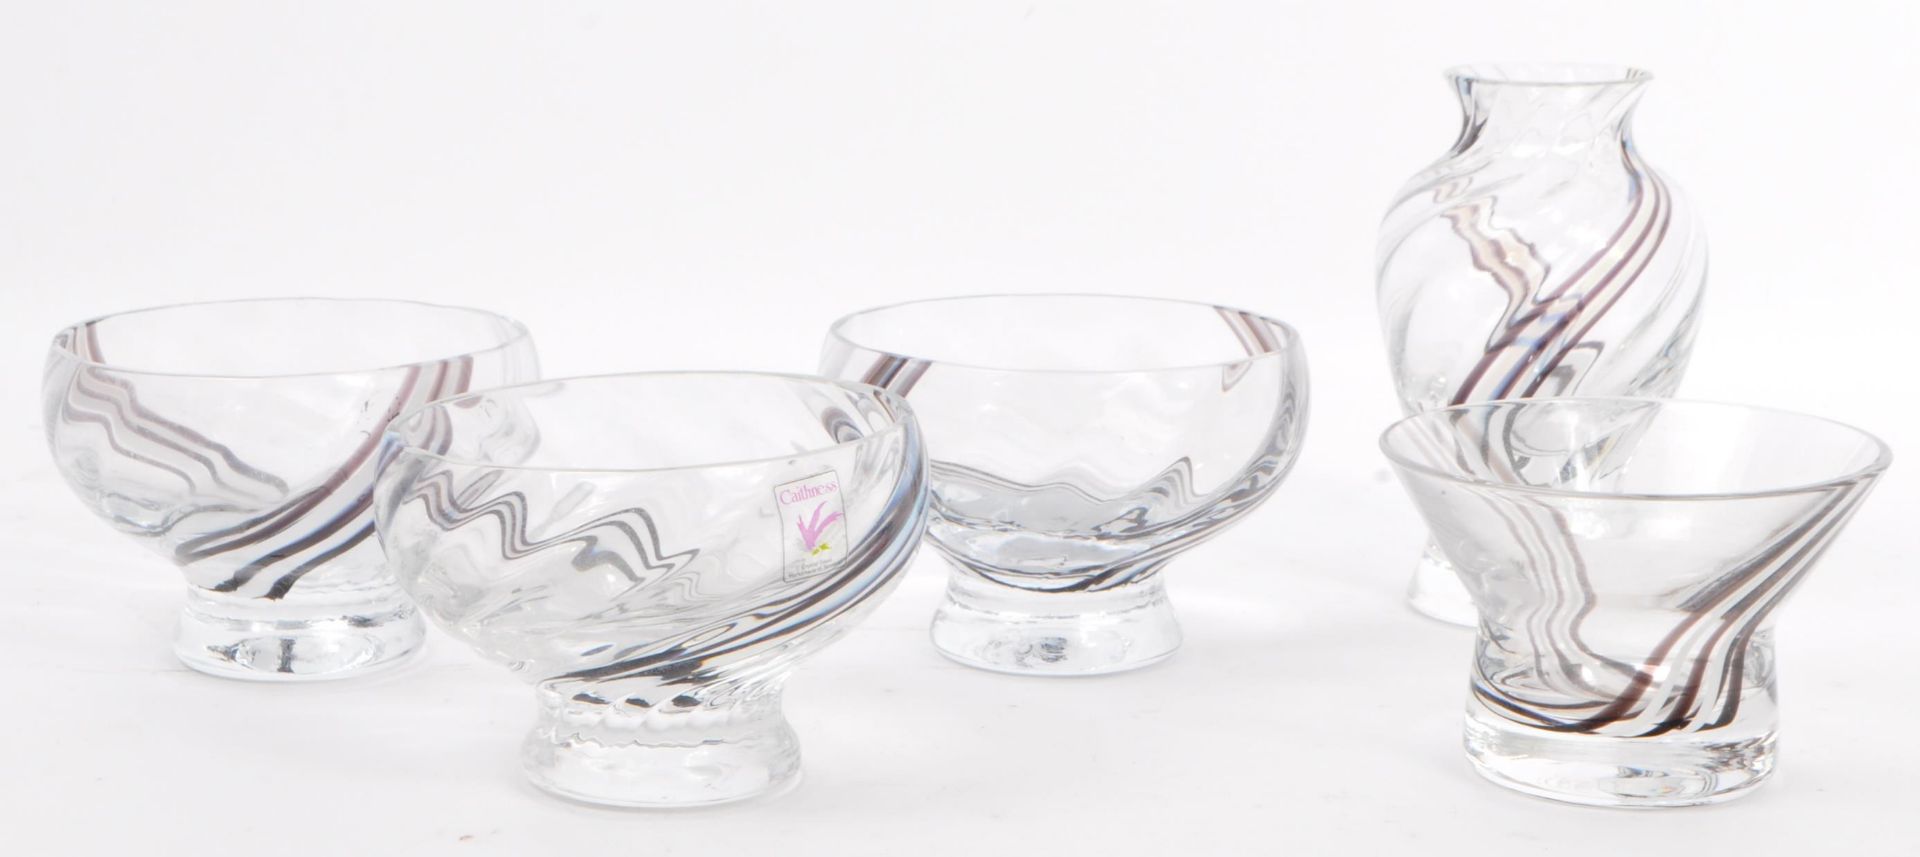 COLLECTION OF CAITHNESS CRYSTAL GLASSES - PANACHE PATTERN - Image 9 of 13